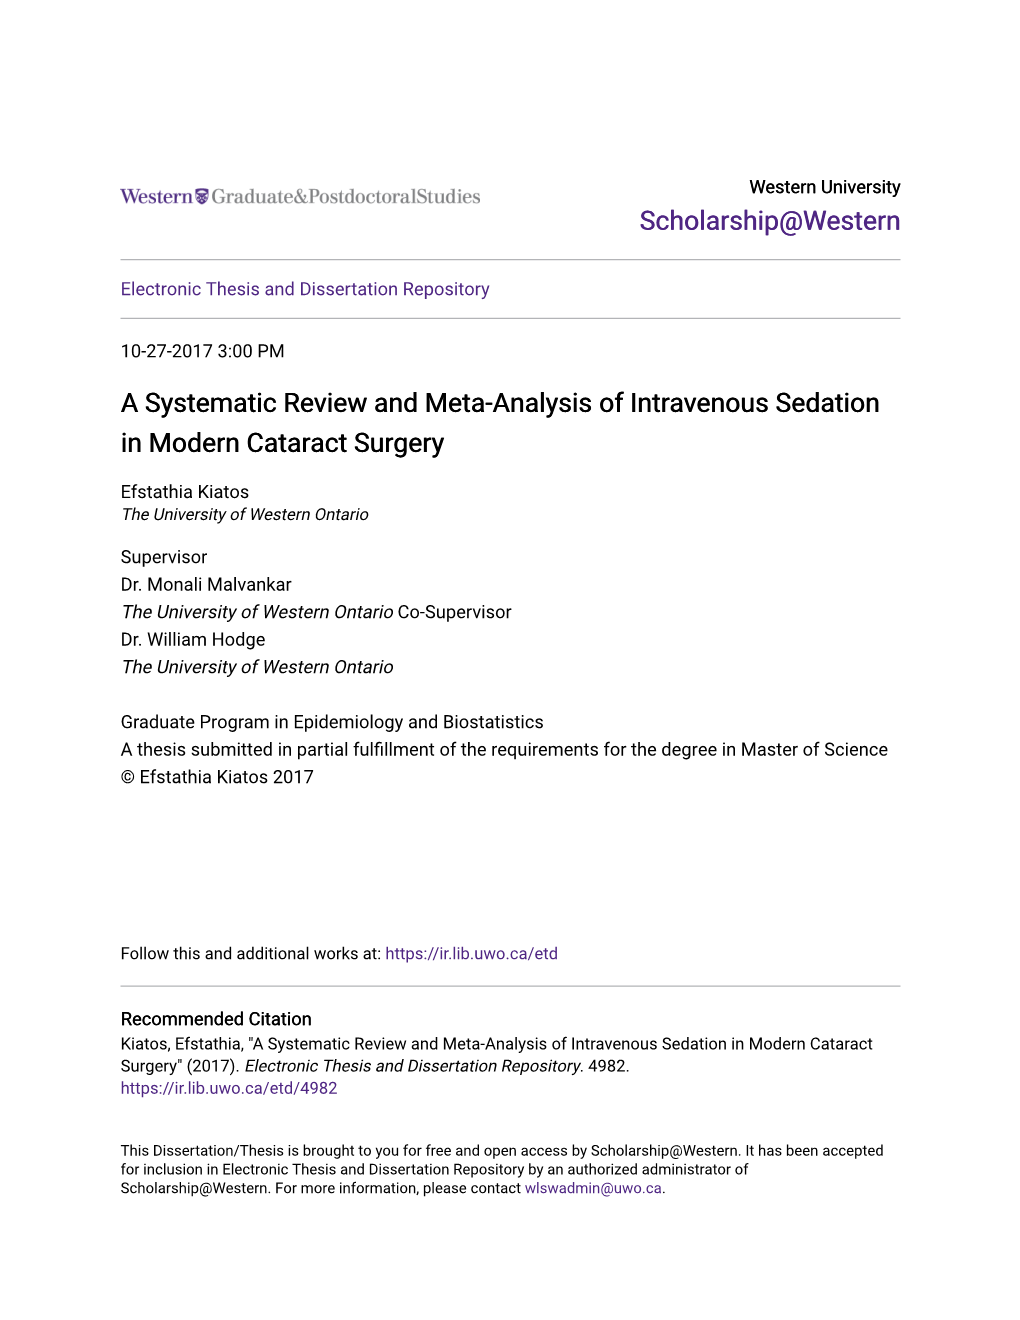 A Systematic Review and Meta-Analysis of Intravenous Sedation in Modern Cataract Surgery